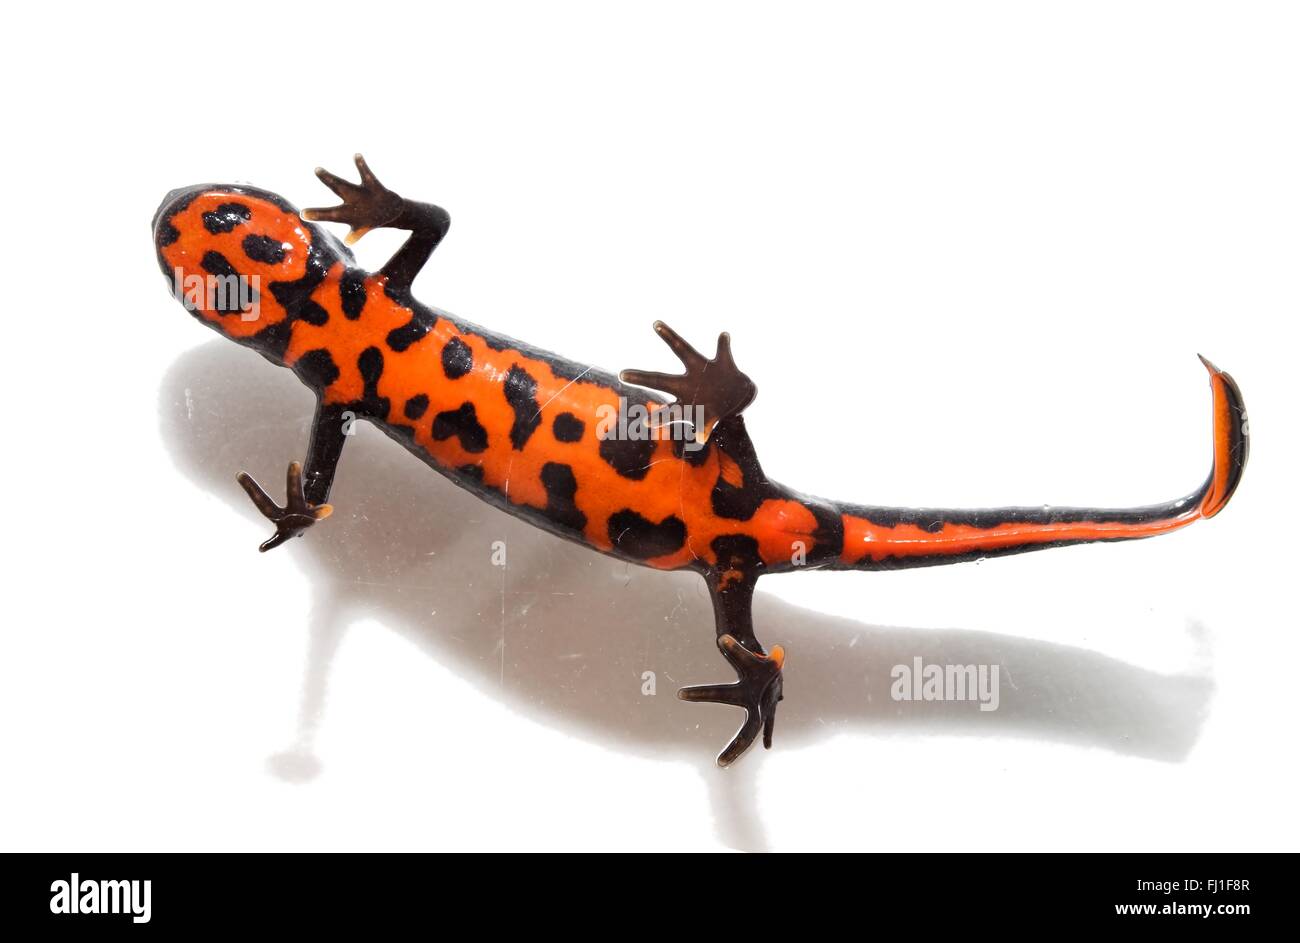 Fire Bellied Newt Belly Animal Is Walking On The Glass Surface Stock